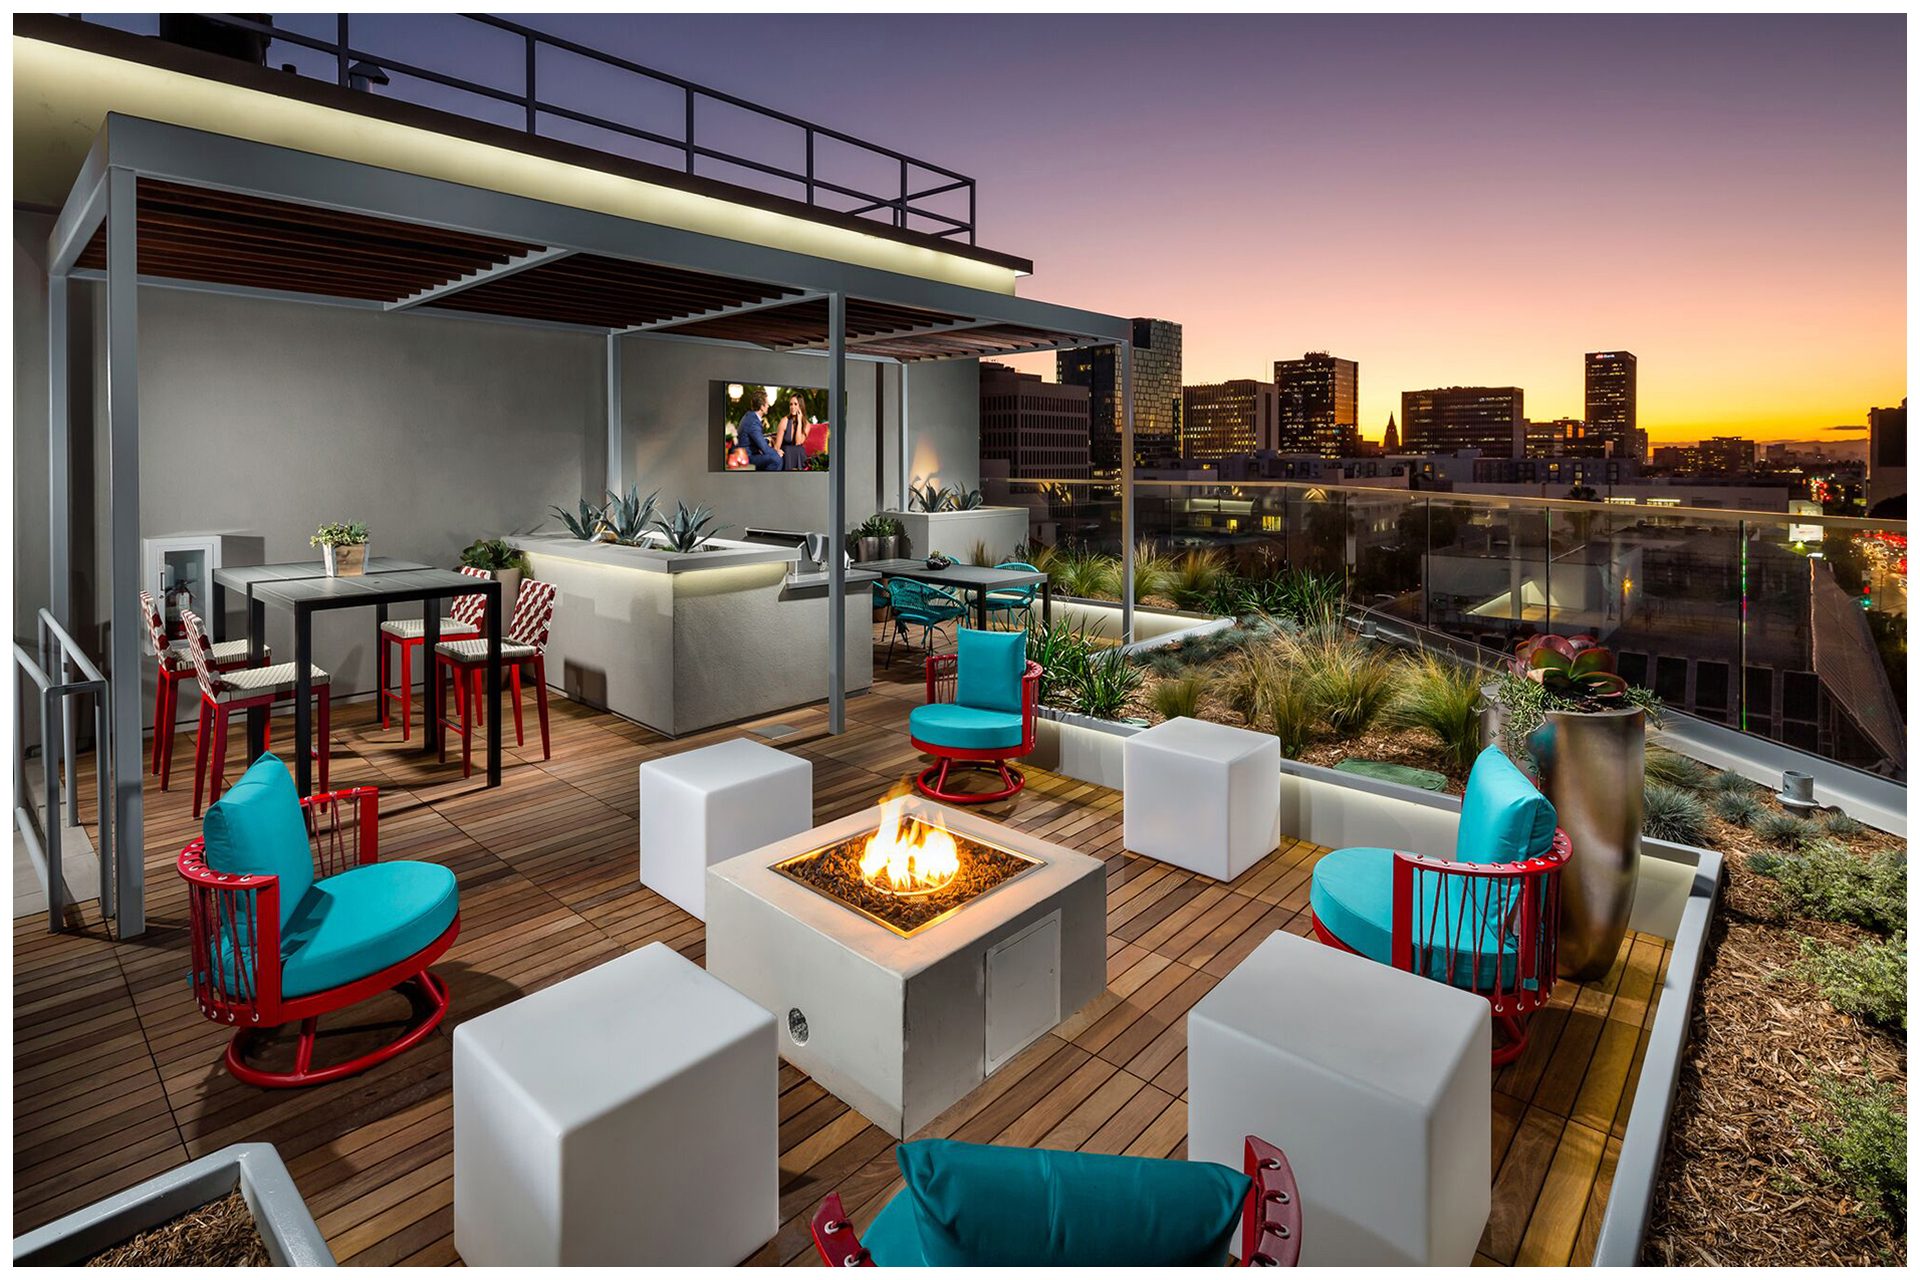 ROOFTOP/SKY DECK PROVISIONSRoof-top Audio & TV & WiFi; Audio Video provisions controlled via a nearby wall-mounted iPad and remotely from leasing office.